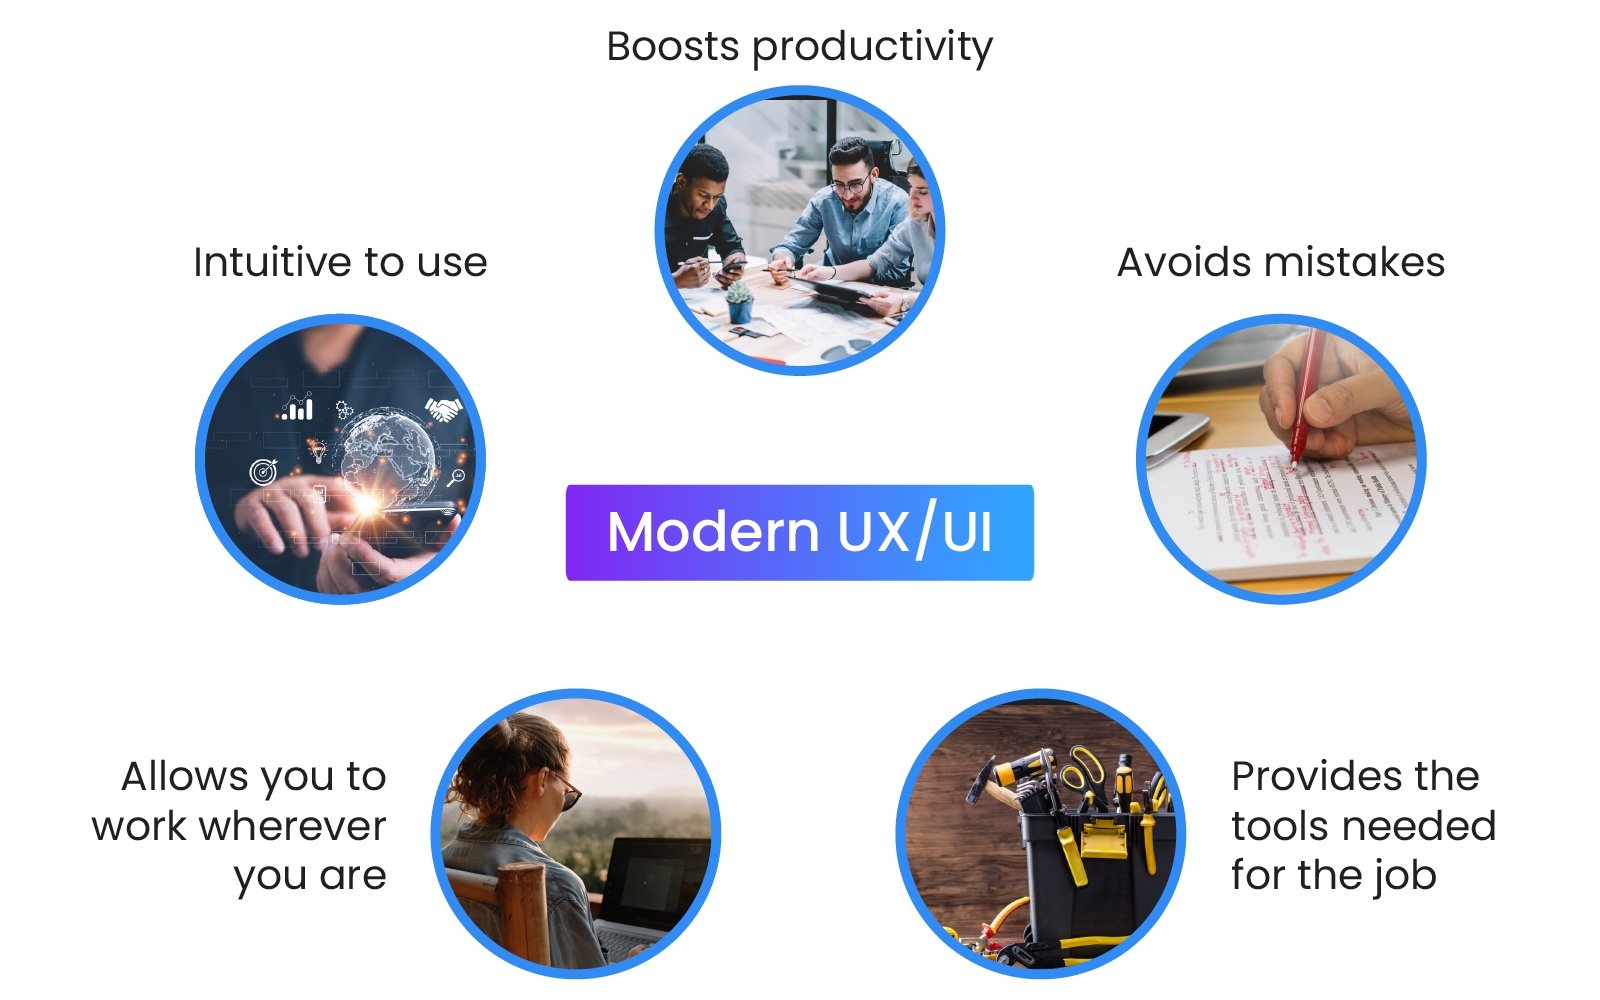 5 aspects enabled by a modern system: boost productivity, avoid mistakes, intuitive to use, work from anywhere and best tools/workflows